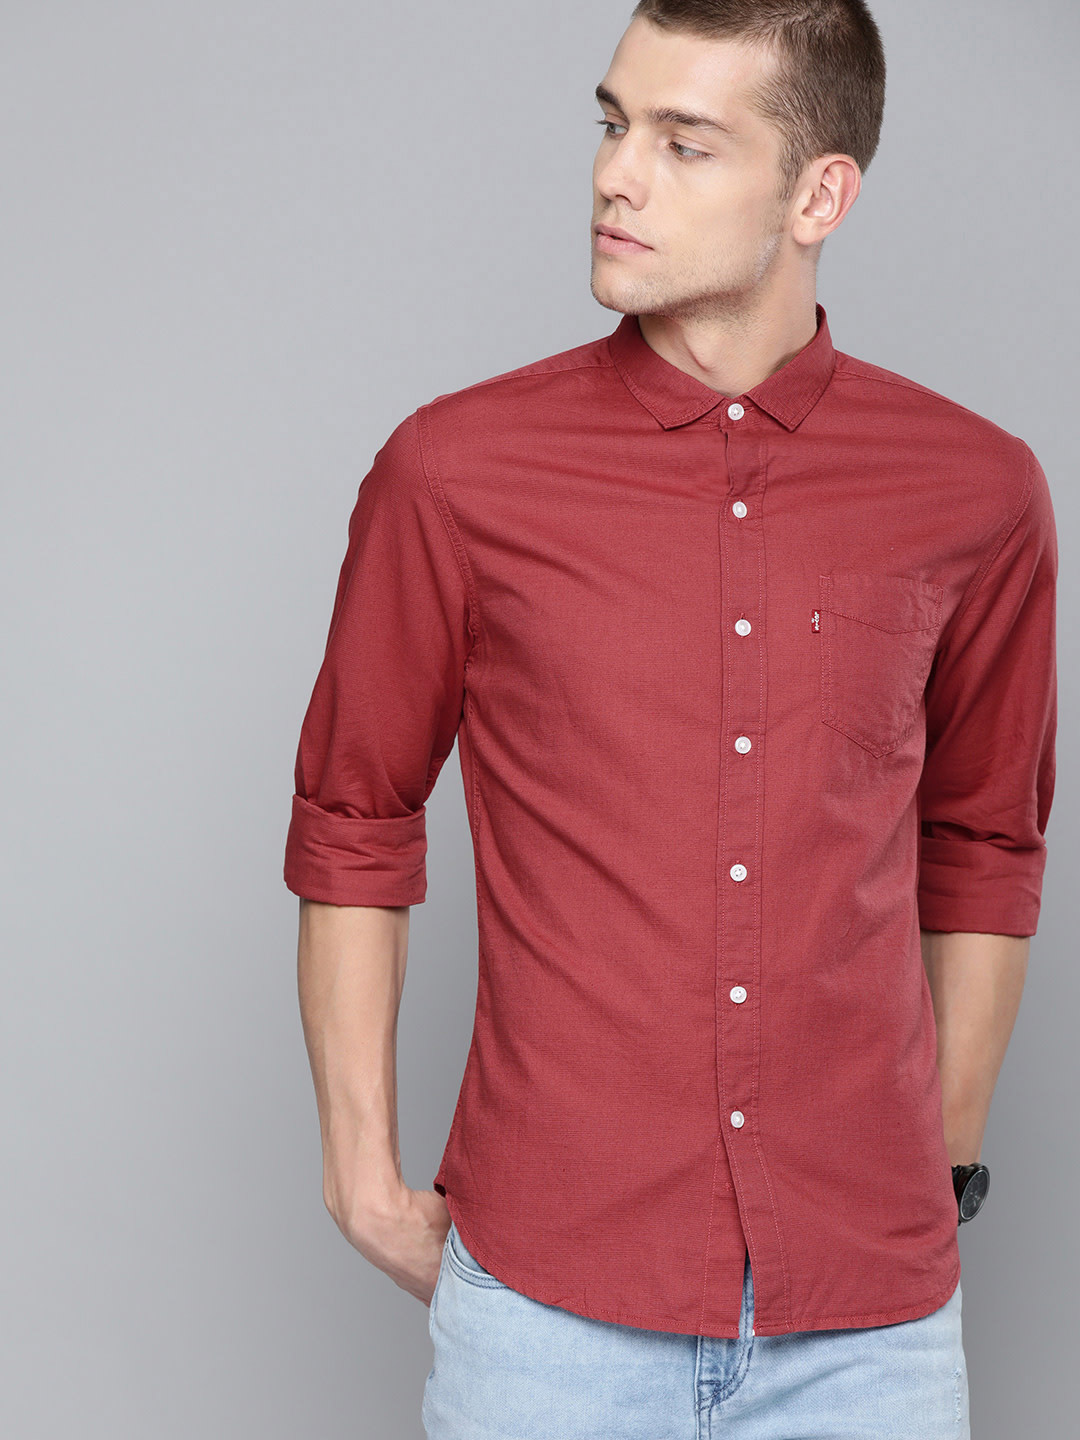 Levis red linen solid casual shirt - G3 